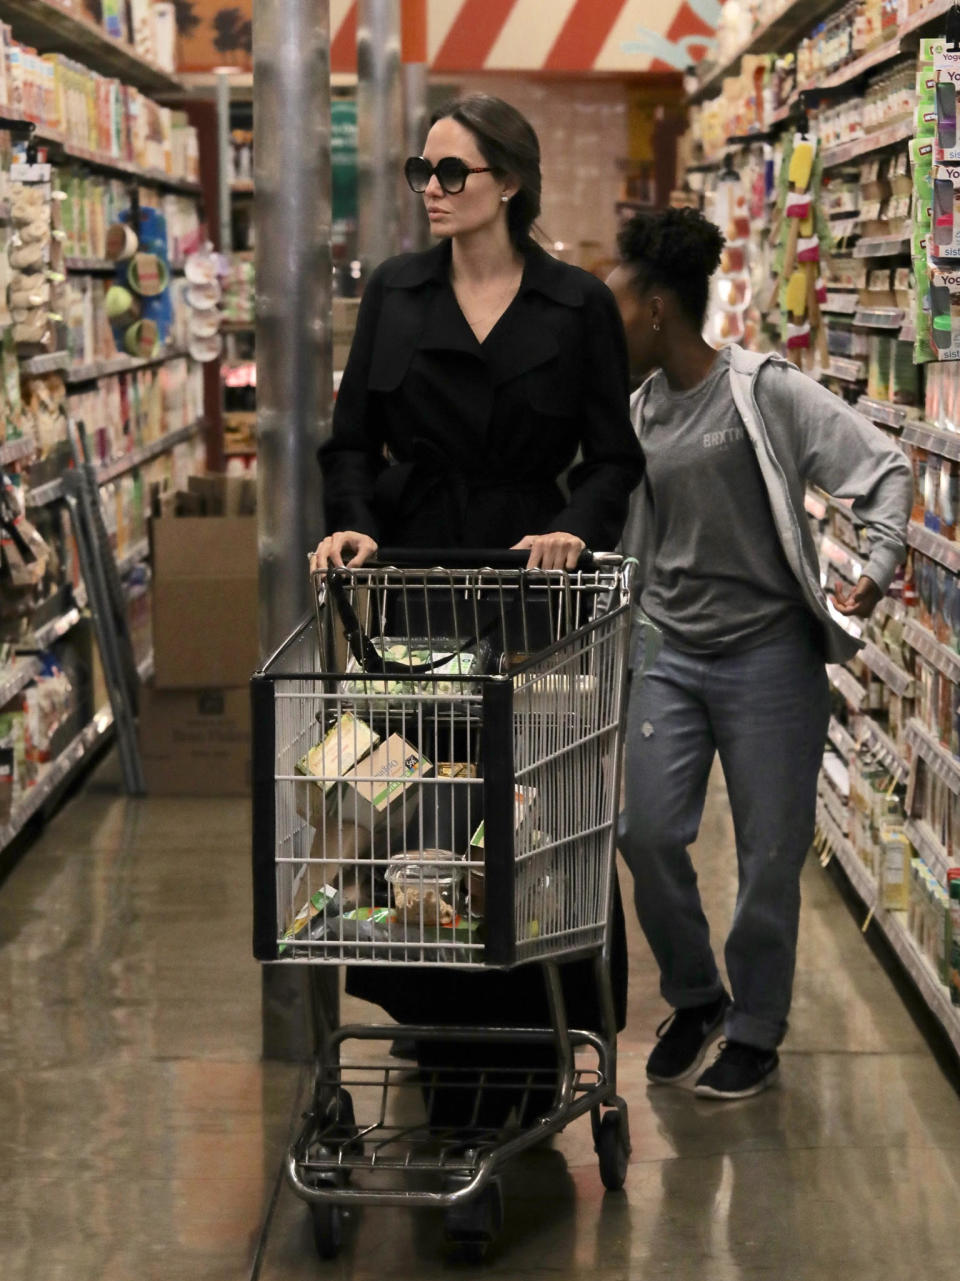 Angelina Jolie grocery-shops with some of her kids, including Zahara Jolie-Pitt, at Whole Foods in L.A. on March 20, 2018. (Photo: Mega Agency)